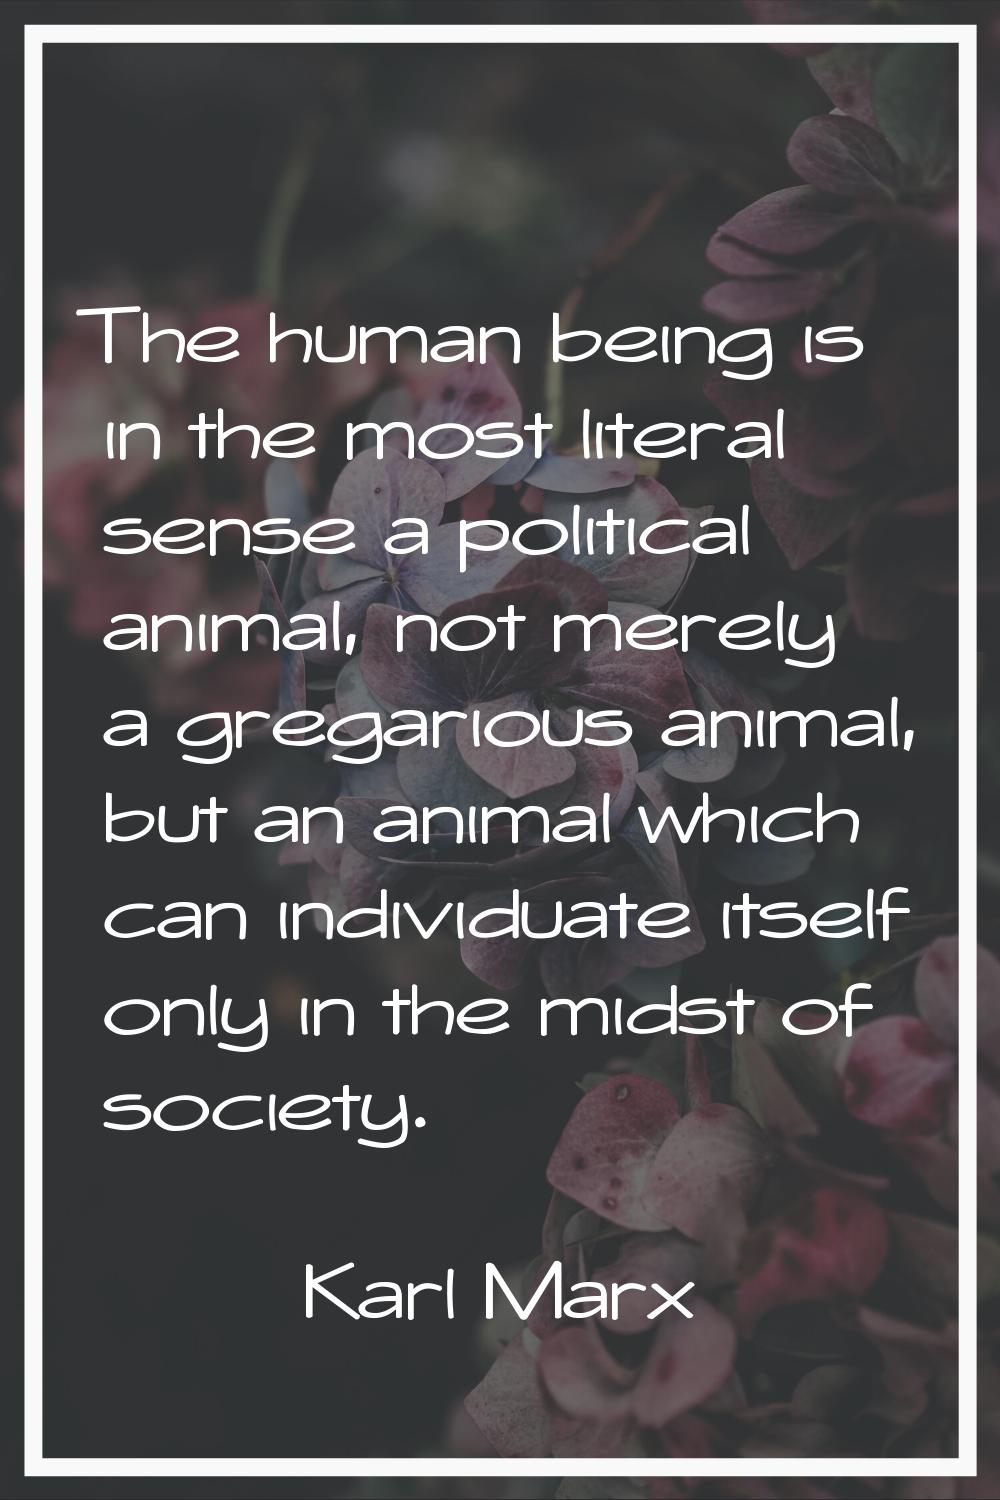 The human being is in the most literal sense a political animal, not merely a gregarious animal, bu